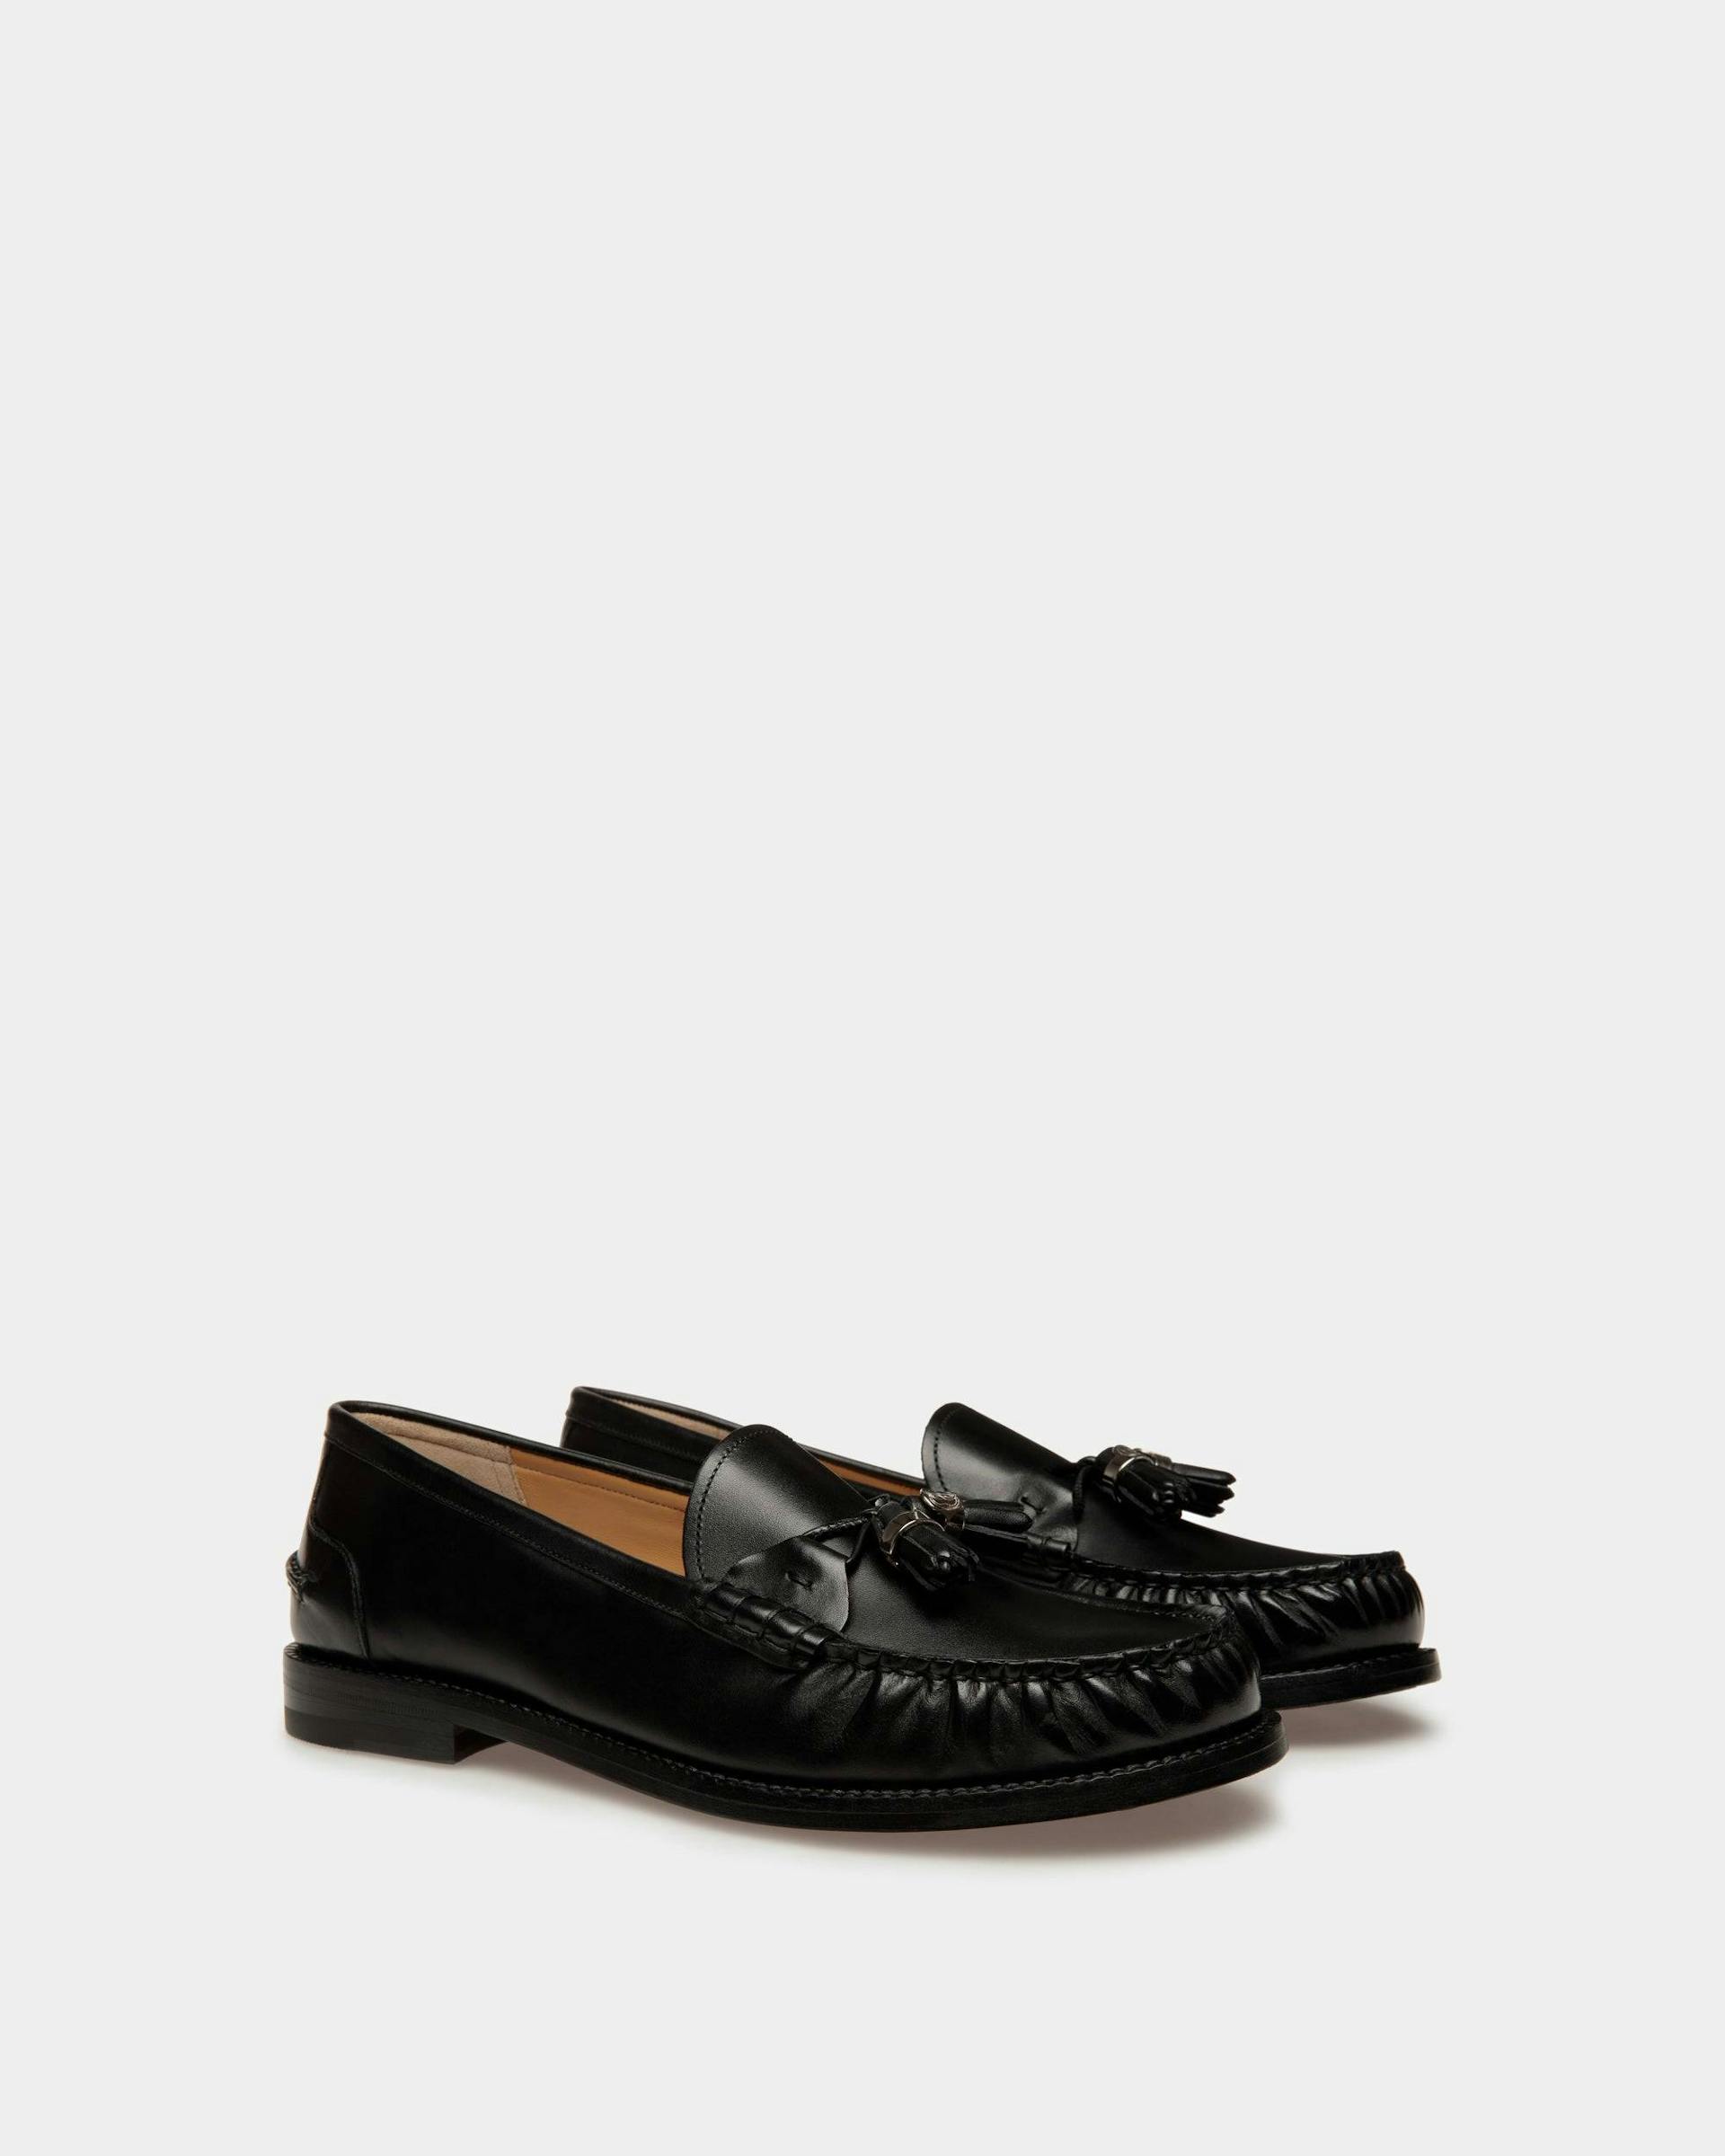 Rome Moccasins In Black Leather - Women's - Bally - 02